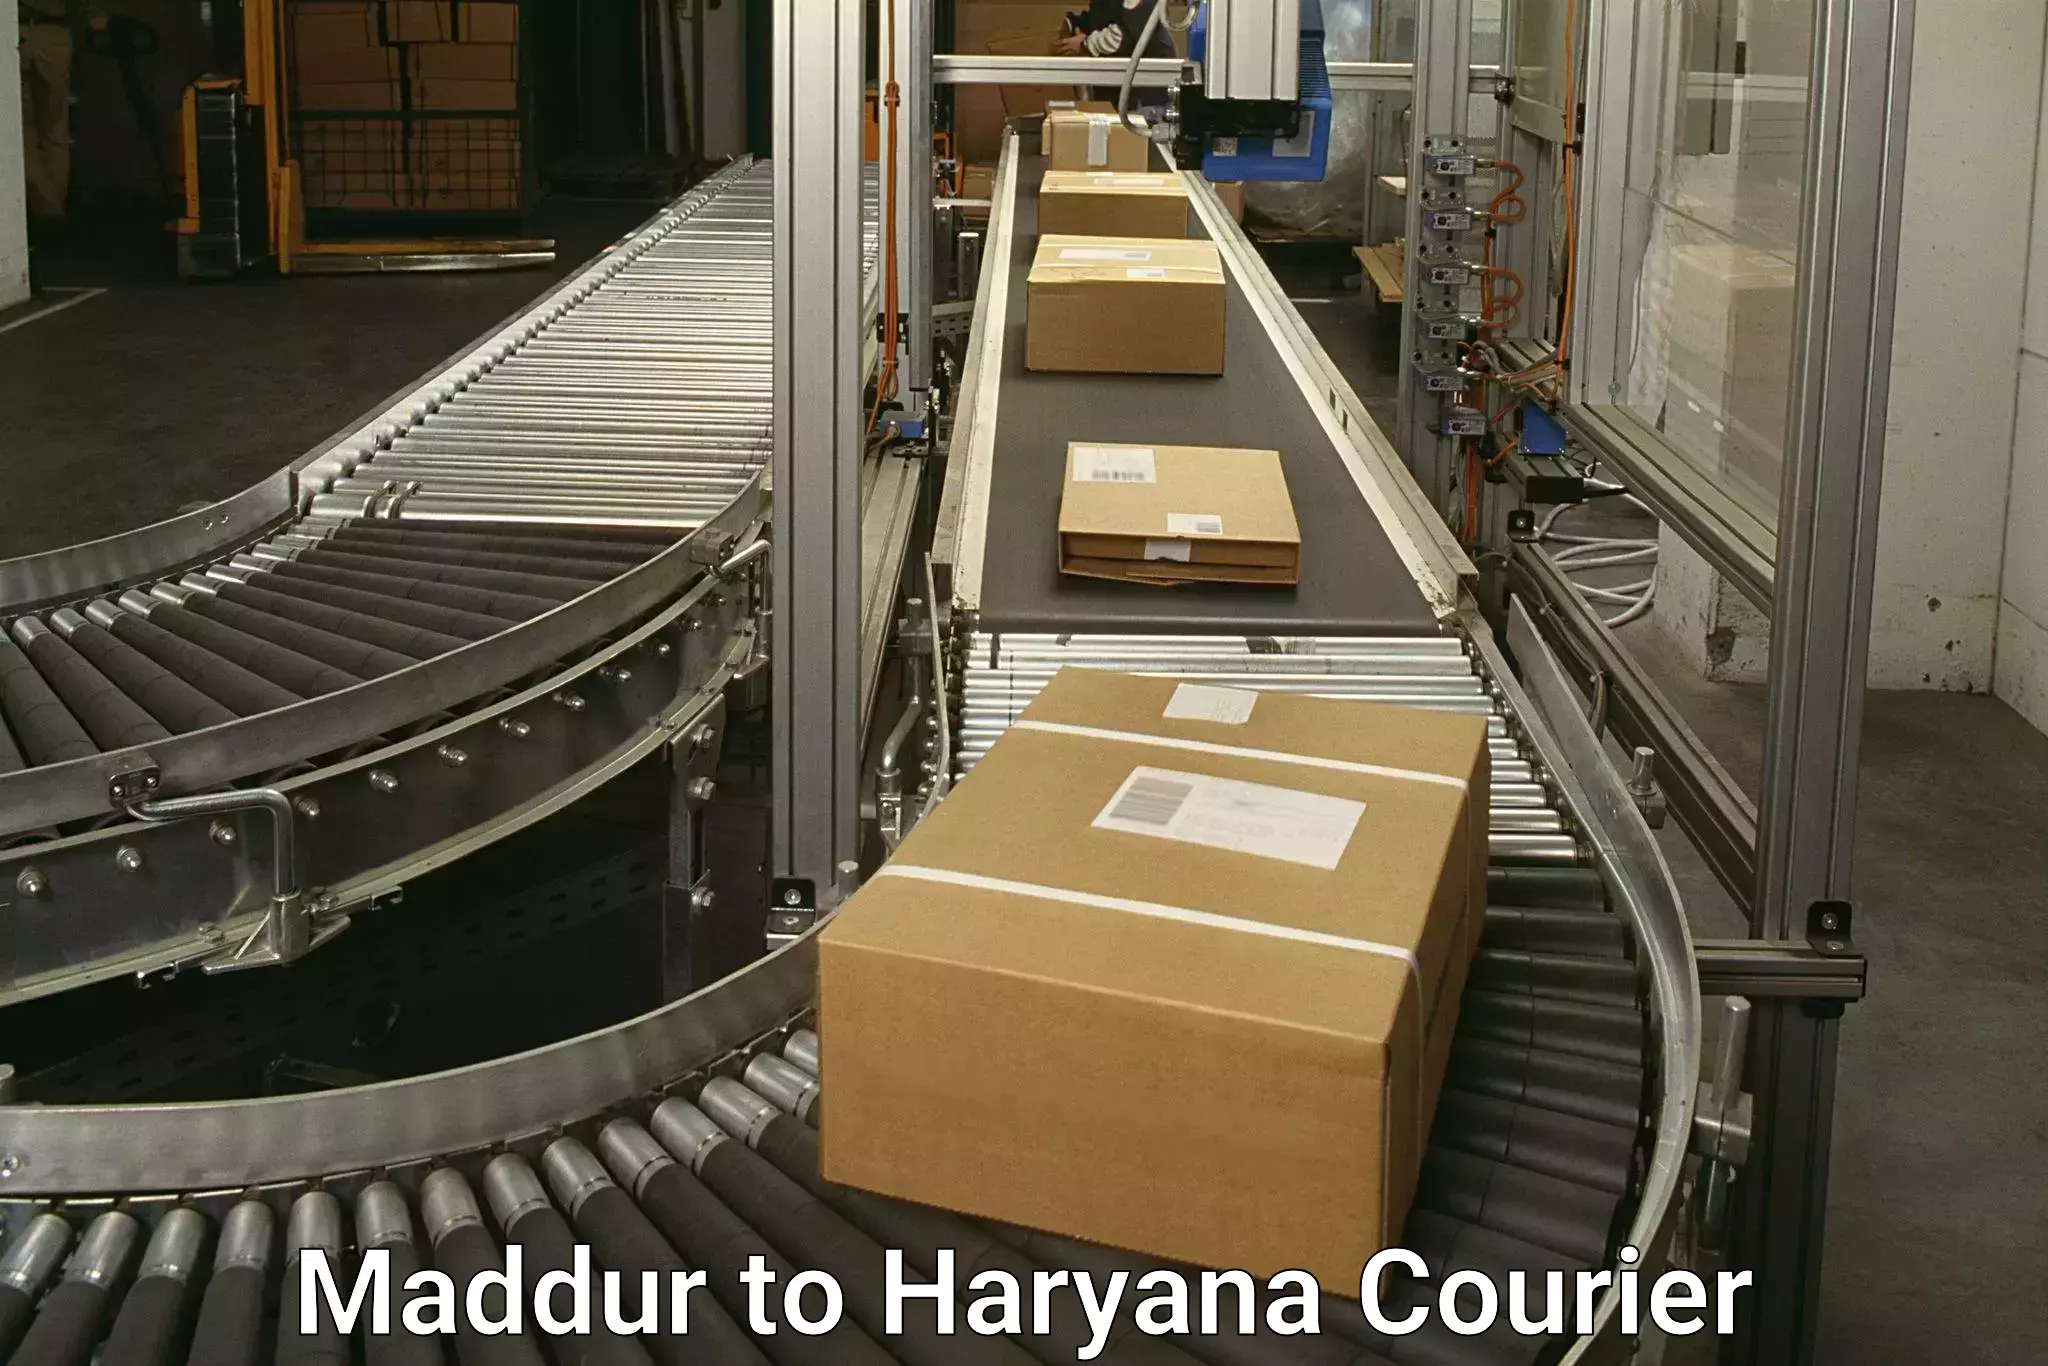 Business shipping needs Maddur to Fatehabad